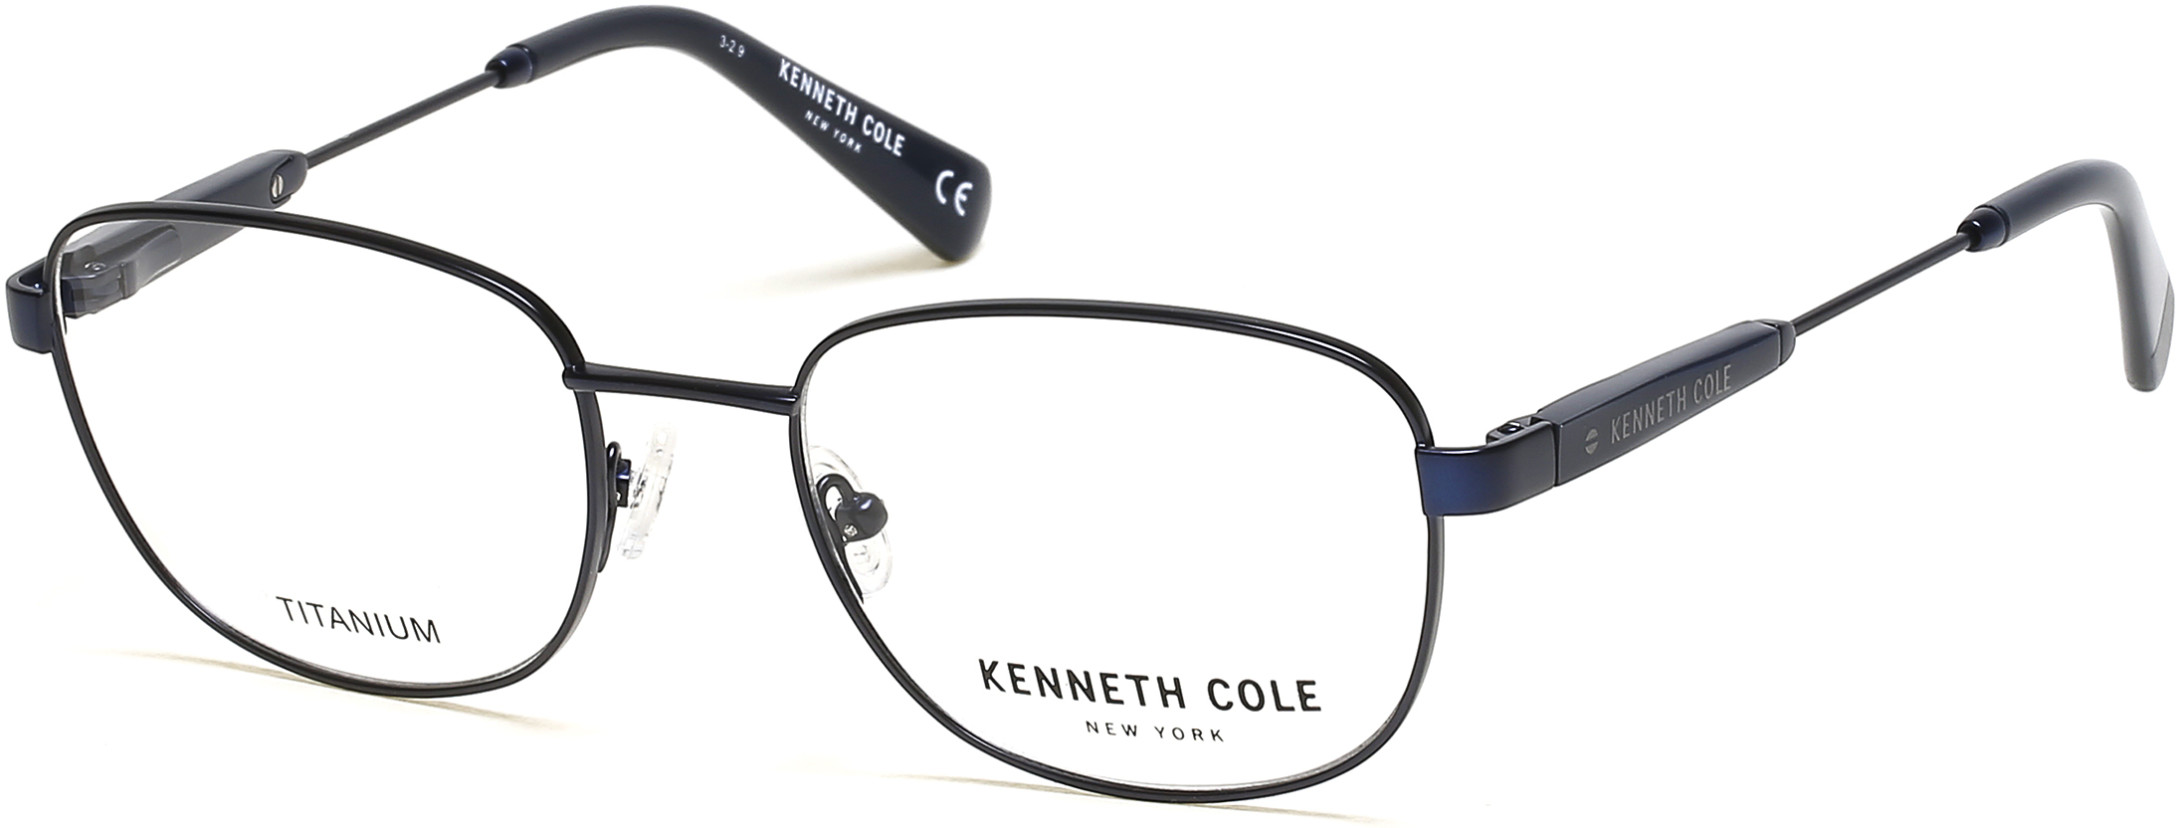 KENNETH COLE NY 0299 091